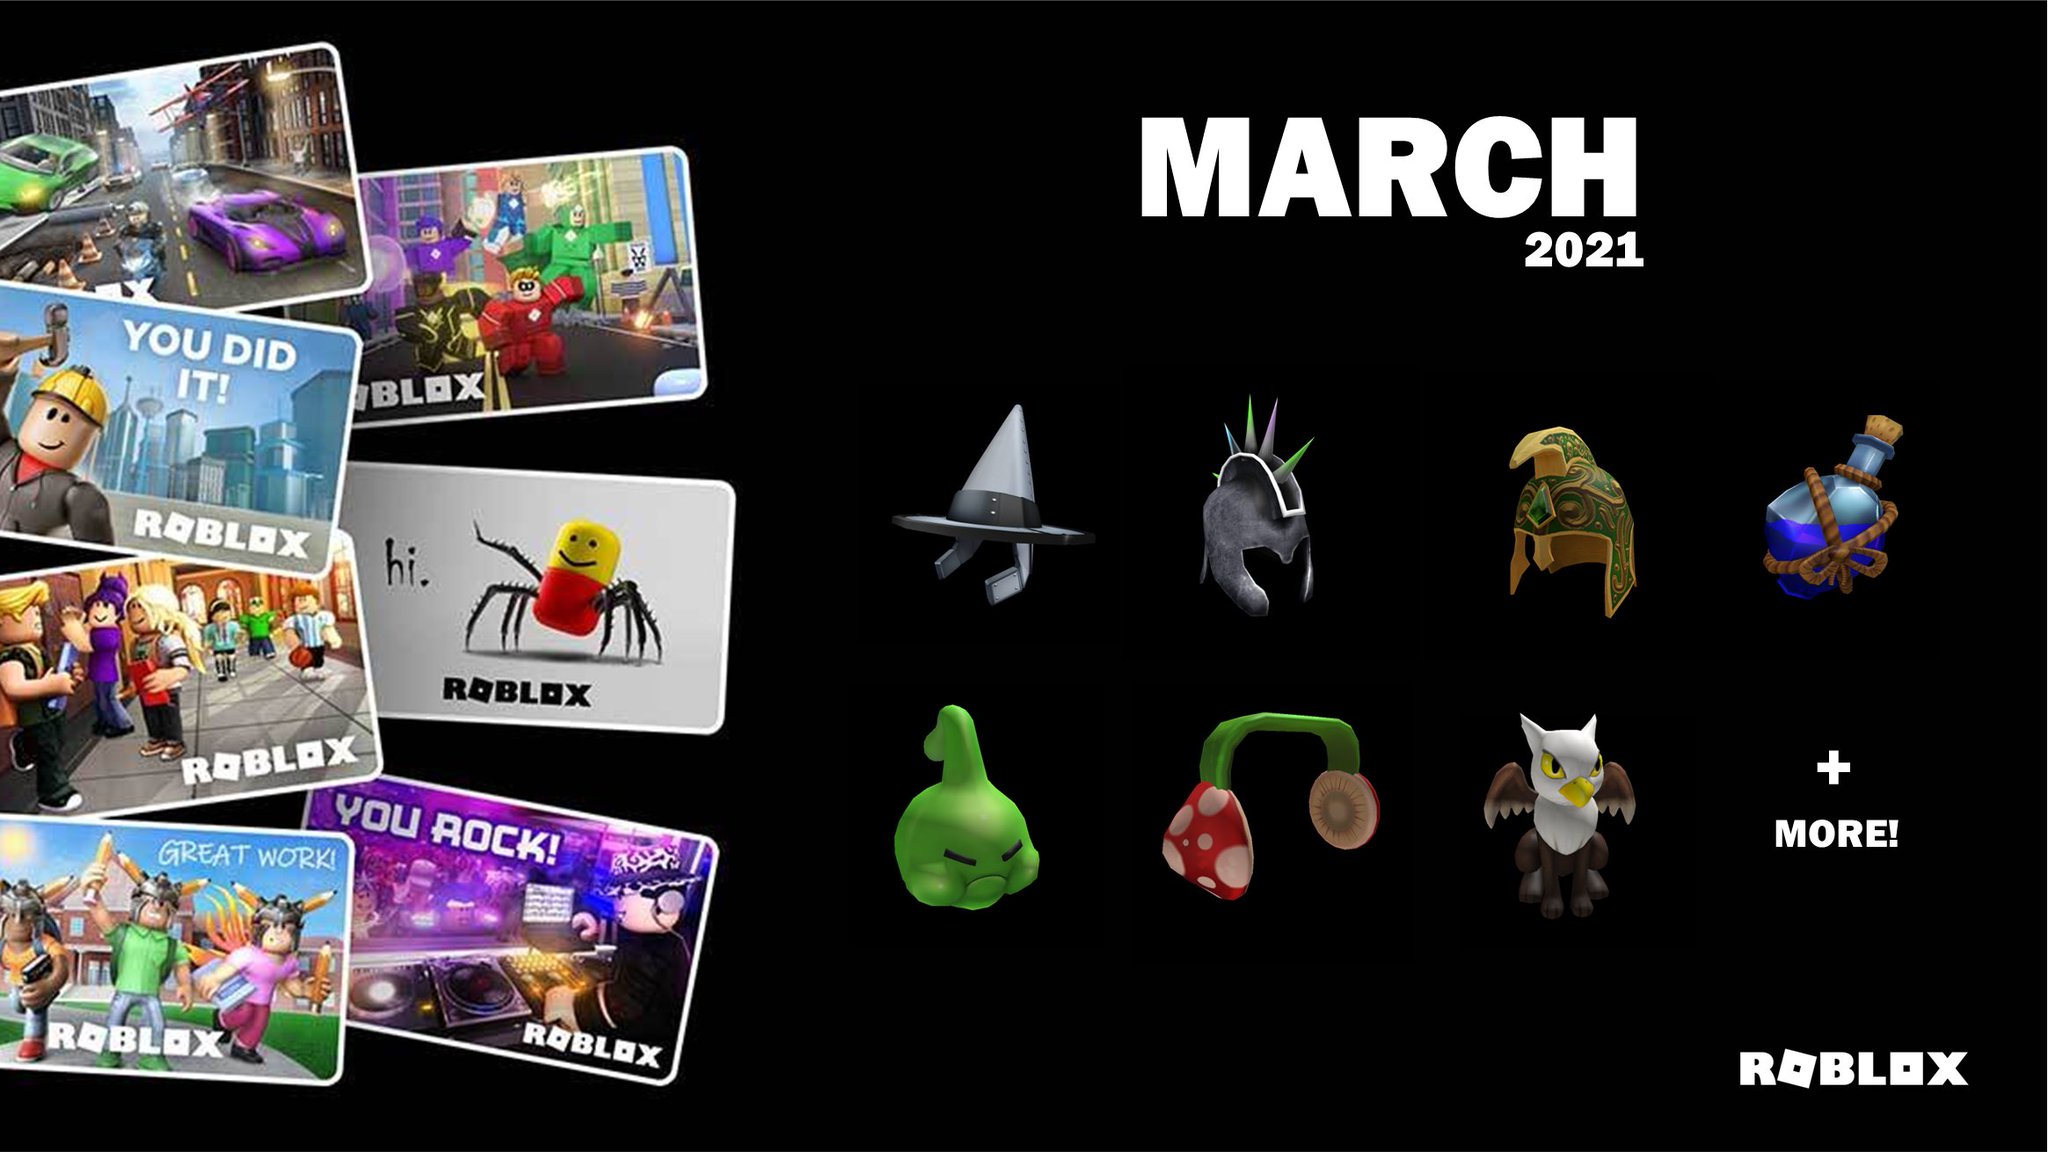 Bloxy News On Twitter The Roblox Gift Card Virtual Items And Their Corresponding Stores For March 2021 Are Now Available Check Them Out Here Https T Co Pujwqlz5yt Purchase A Gift Card Https T Co Sedyuakbde - roblox cards 2021 october